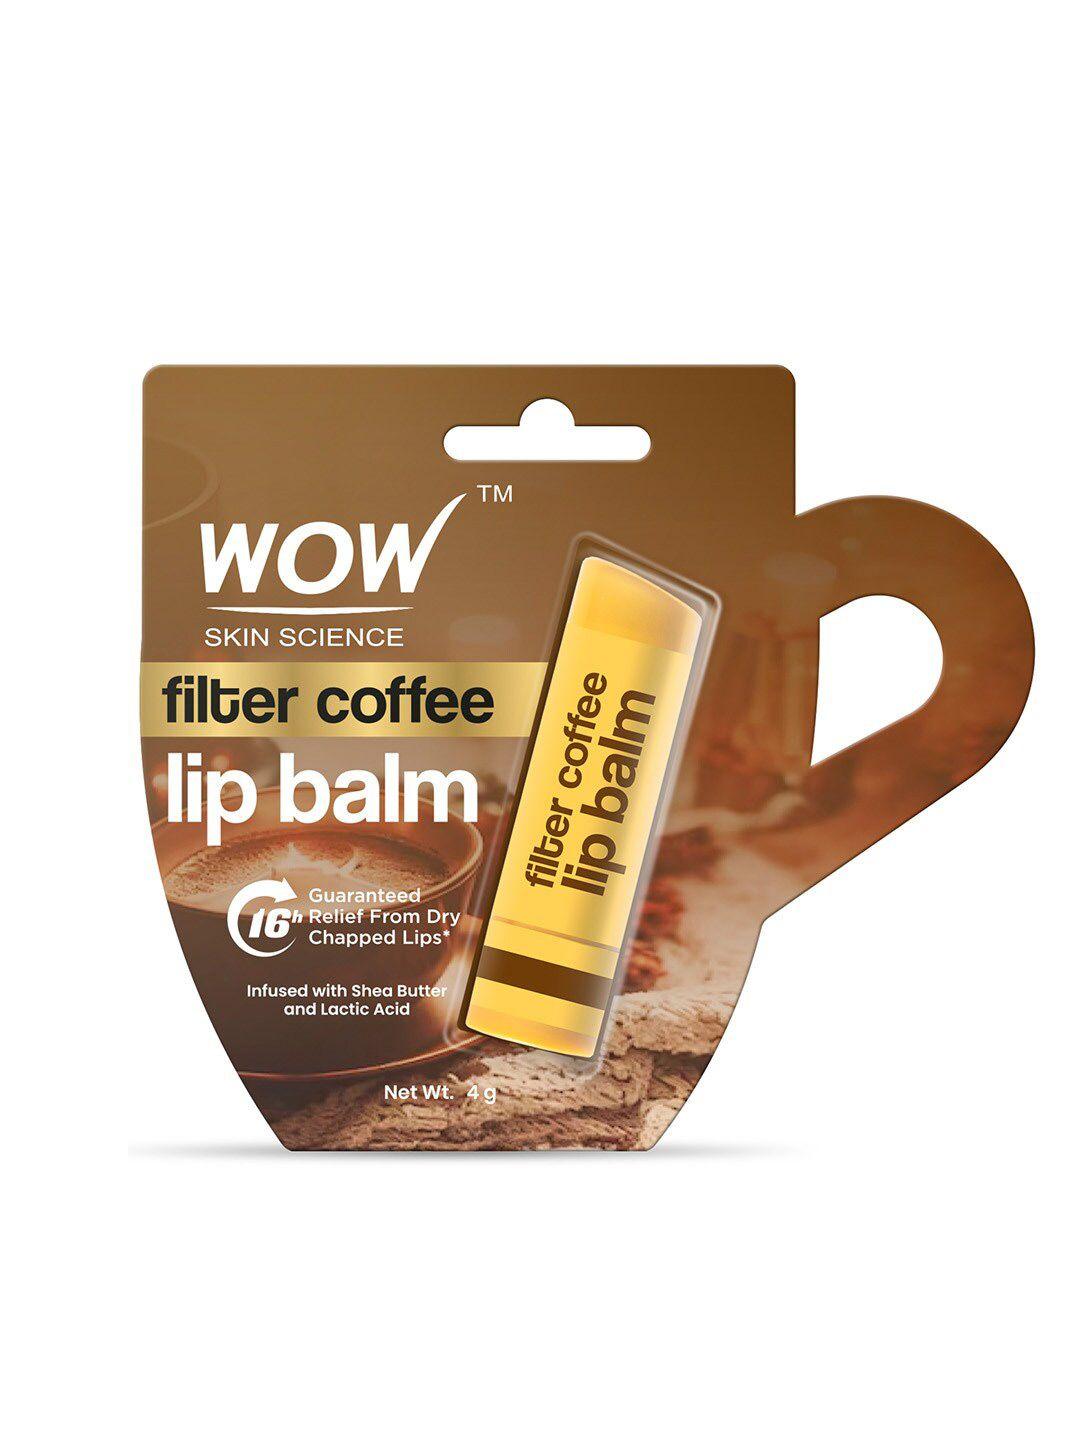 wow skin science filter coffee lip balm with shea butter & lactic acid 4 g - brown